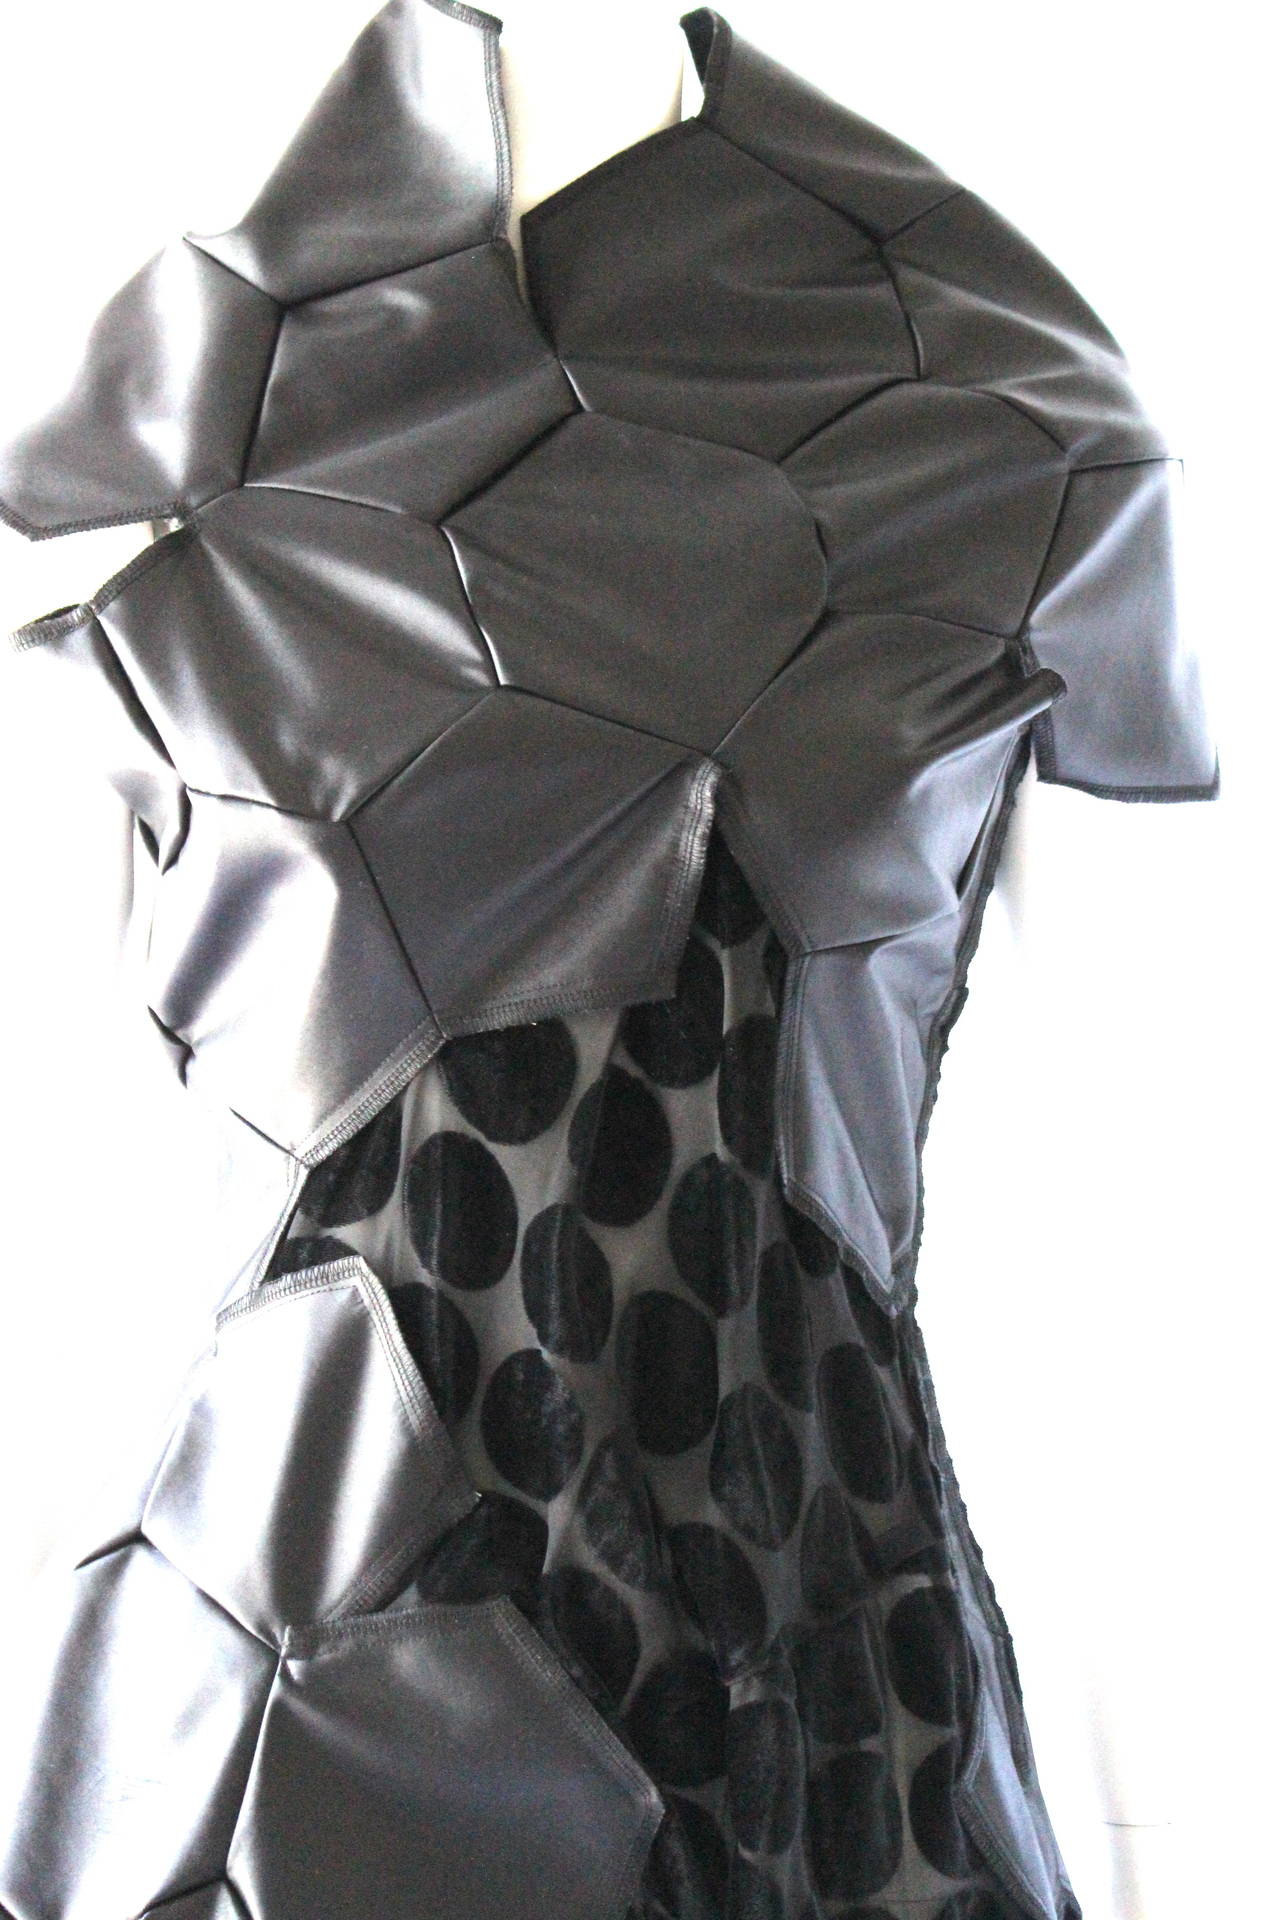 Comme des Garcons AD 2008 Runway Dress

Hexagonal patches create rounded football shape of bodice and skirt
Overlaid on large polka dot voided velvet dress

labelled size XS